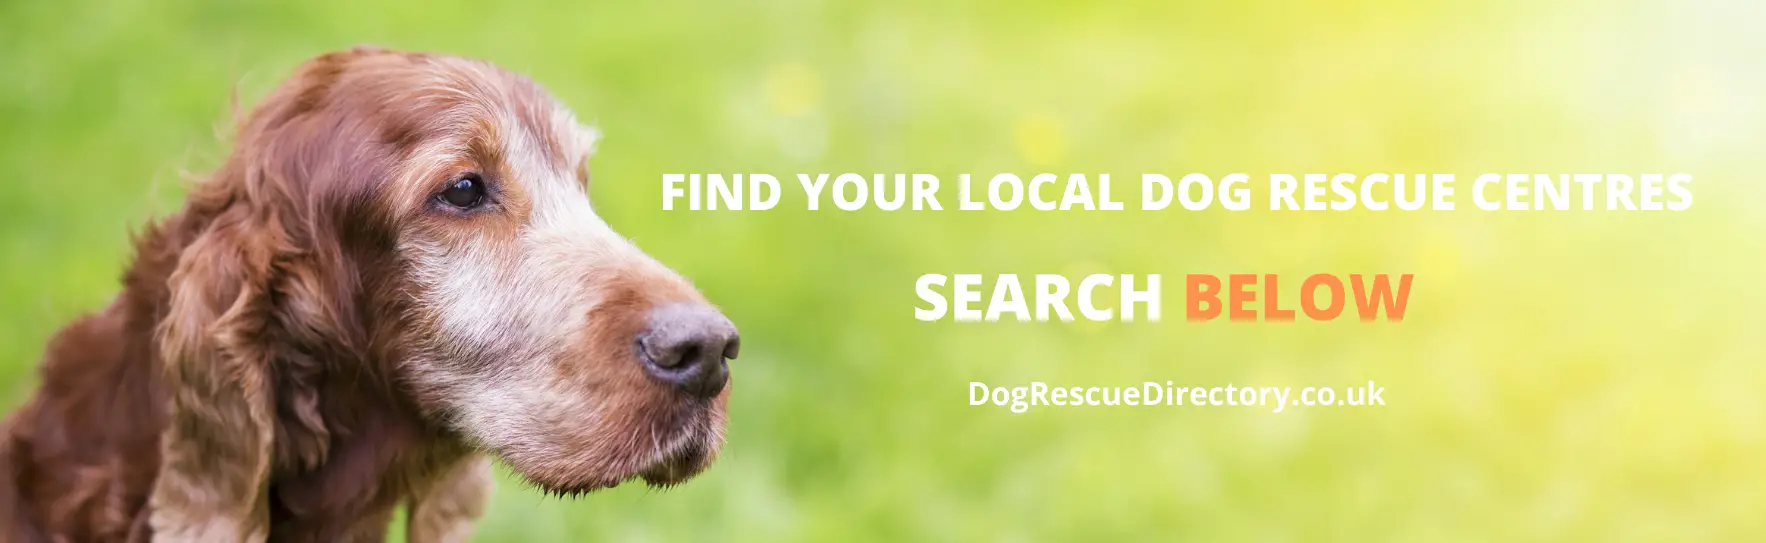 Top 10 Local Dog Rescue Organizations Find the Perfect Match for Your Furry Friend